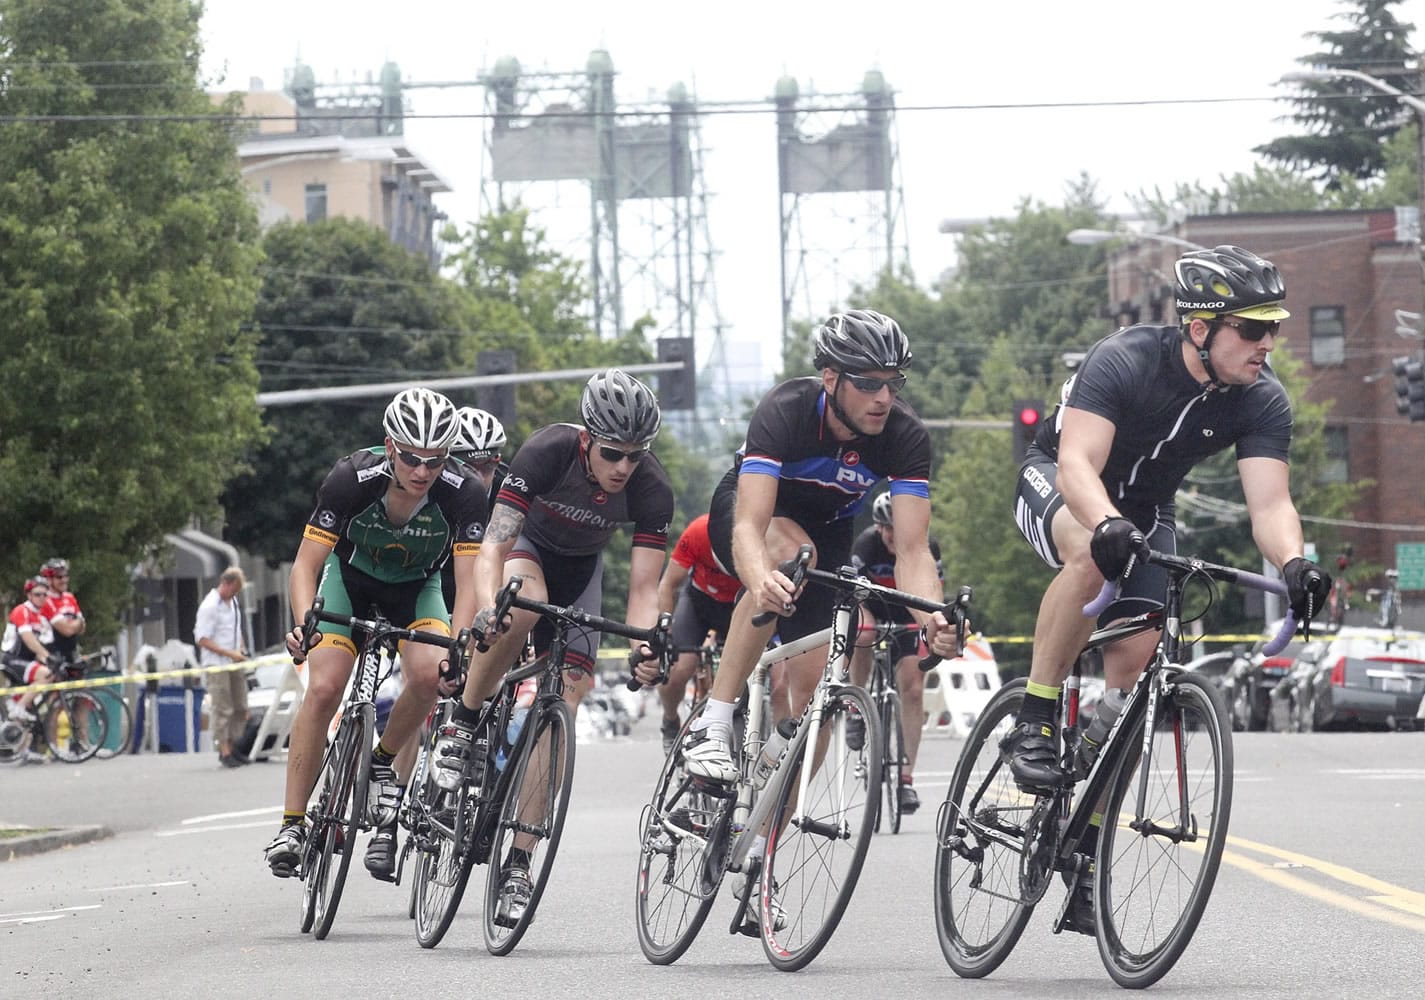 Cyclists pedal up Columbia Street on Sunday during the Vancouver Courthouse Criterium, an eight-corner circuit road course through the heart of the city.